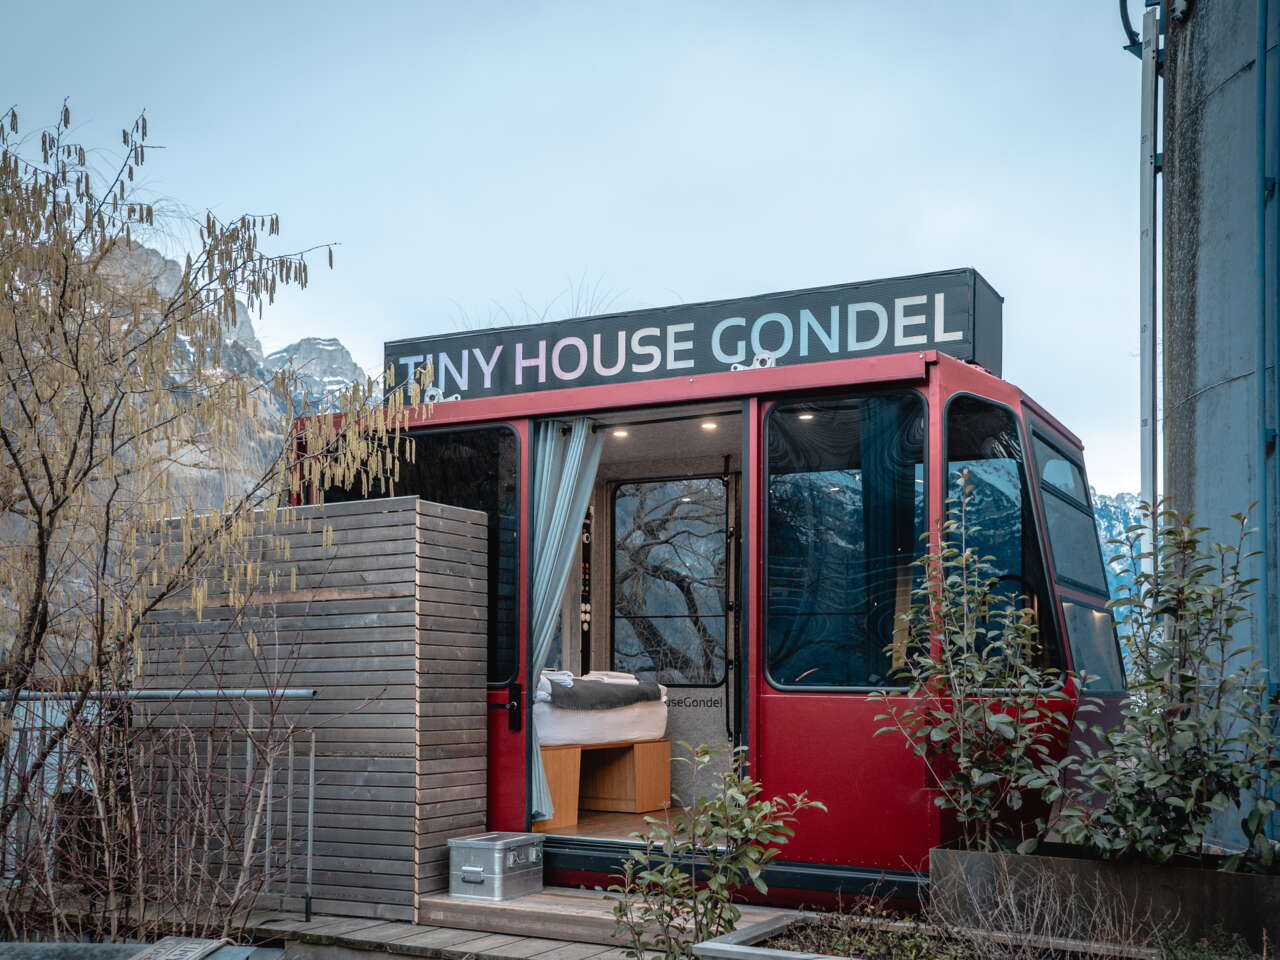 Tiny House Gondel am Walensee